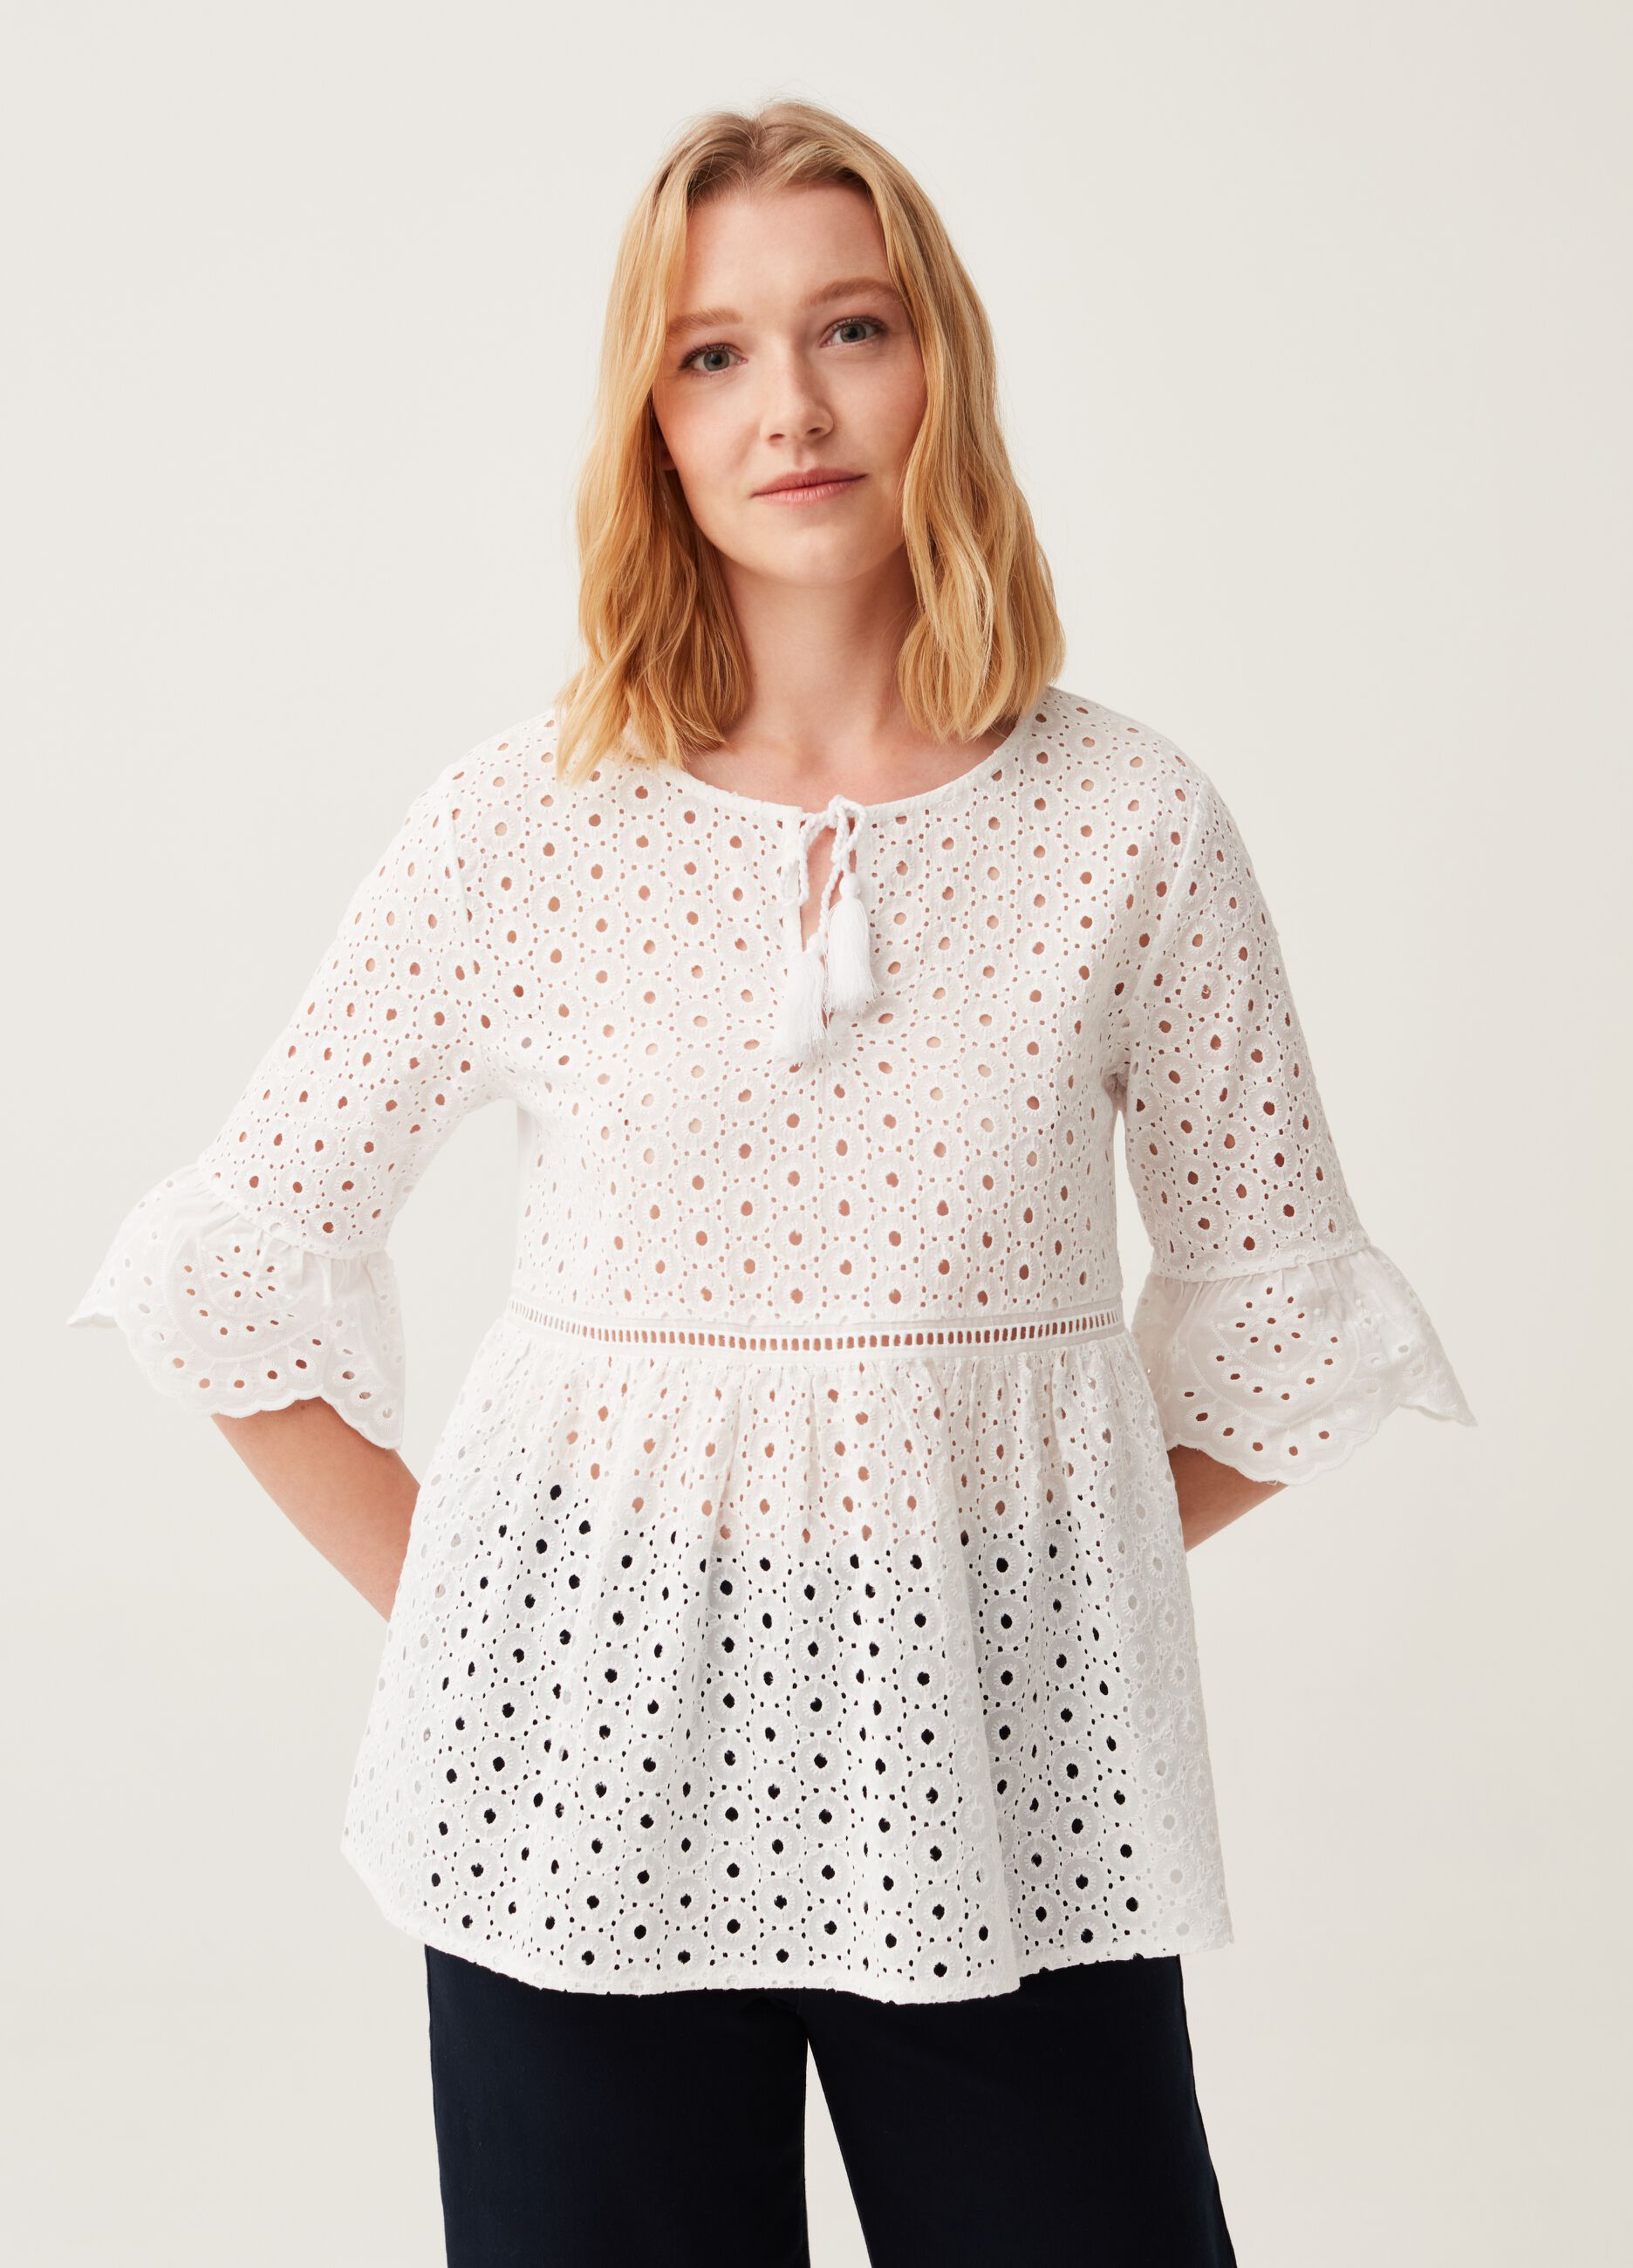 T-shirt in broderie anglaise lace with flounce